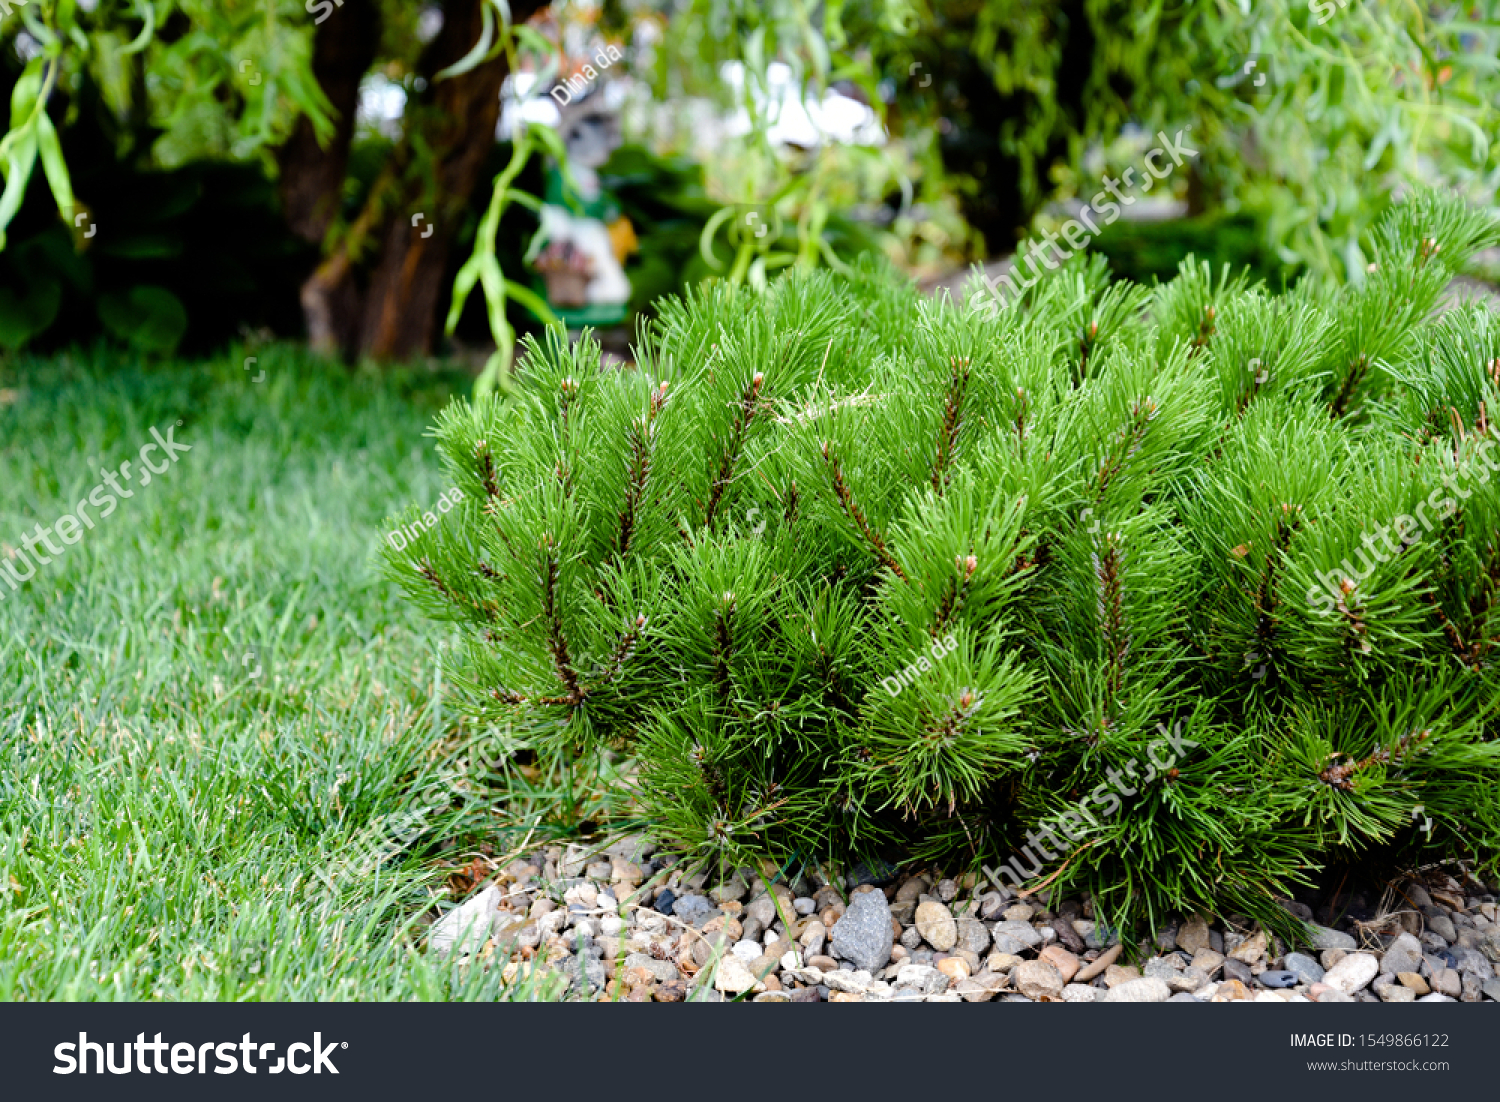 Landscape design. Composition, in the foreground, dwarf mountain pine, mountain pine, Mugo pine or creeping pine. #1549866122